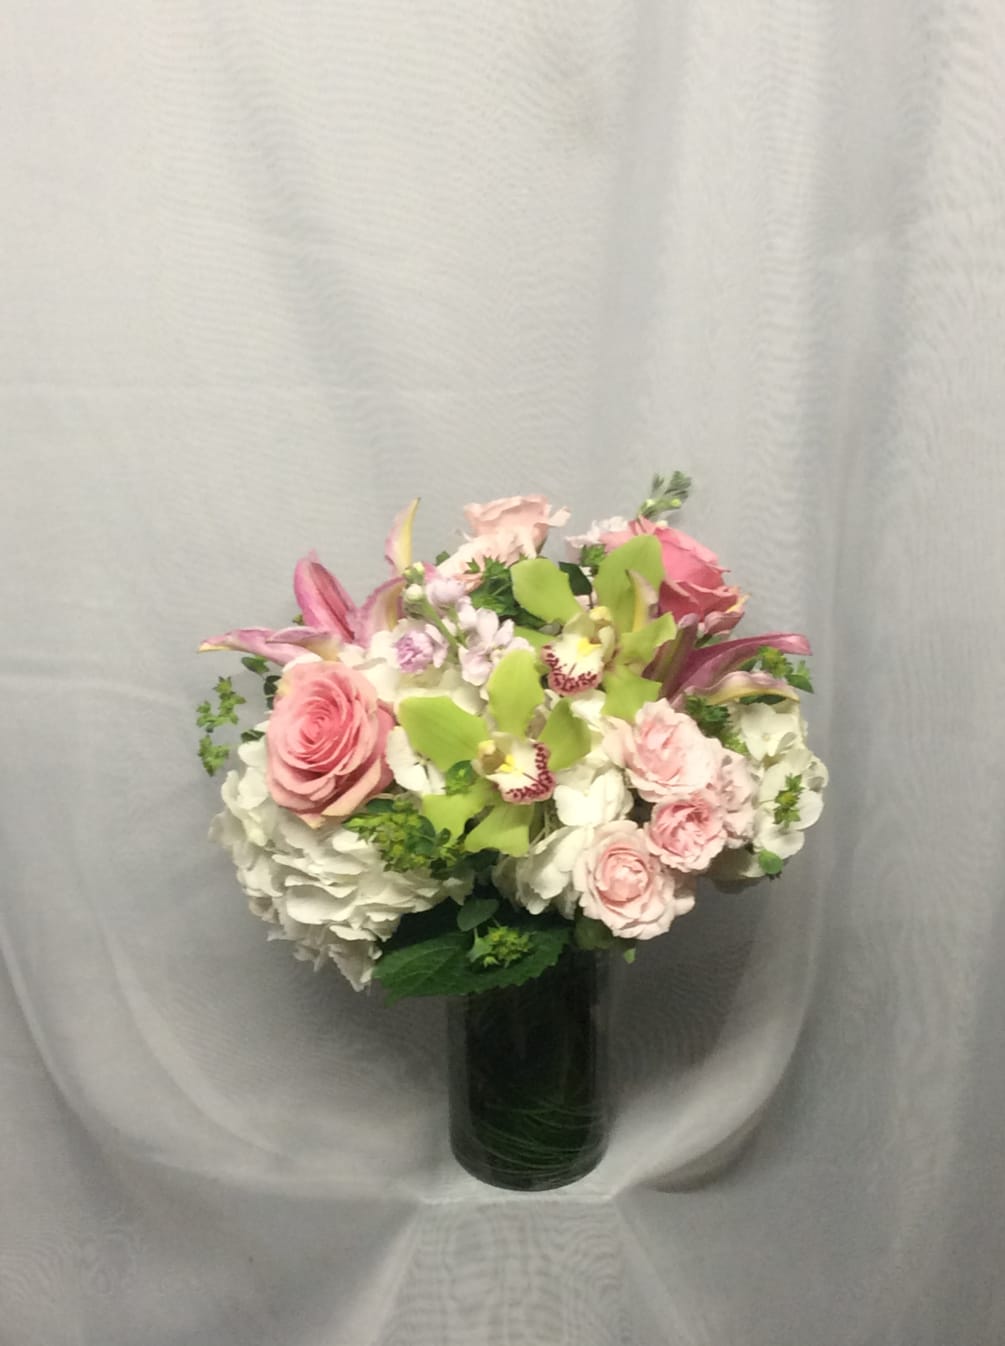 A beautiful arrangement with roses, spray roses, orchids, hydrangeas and lilies